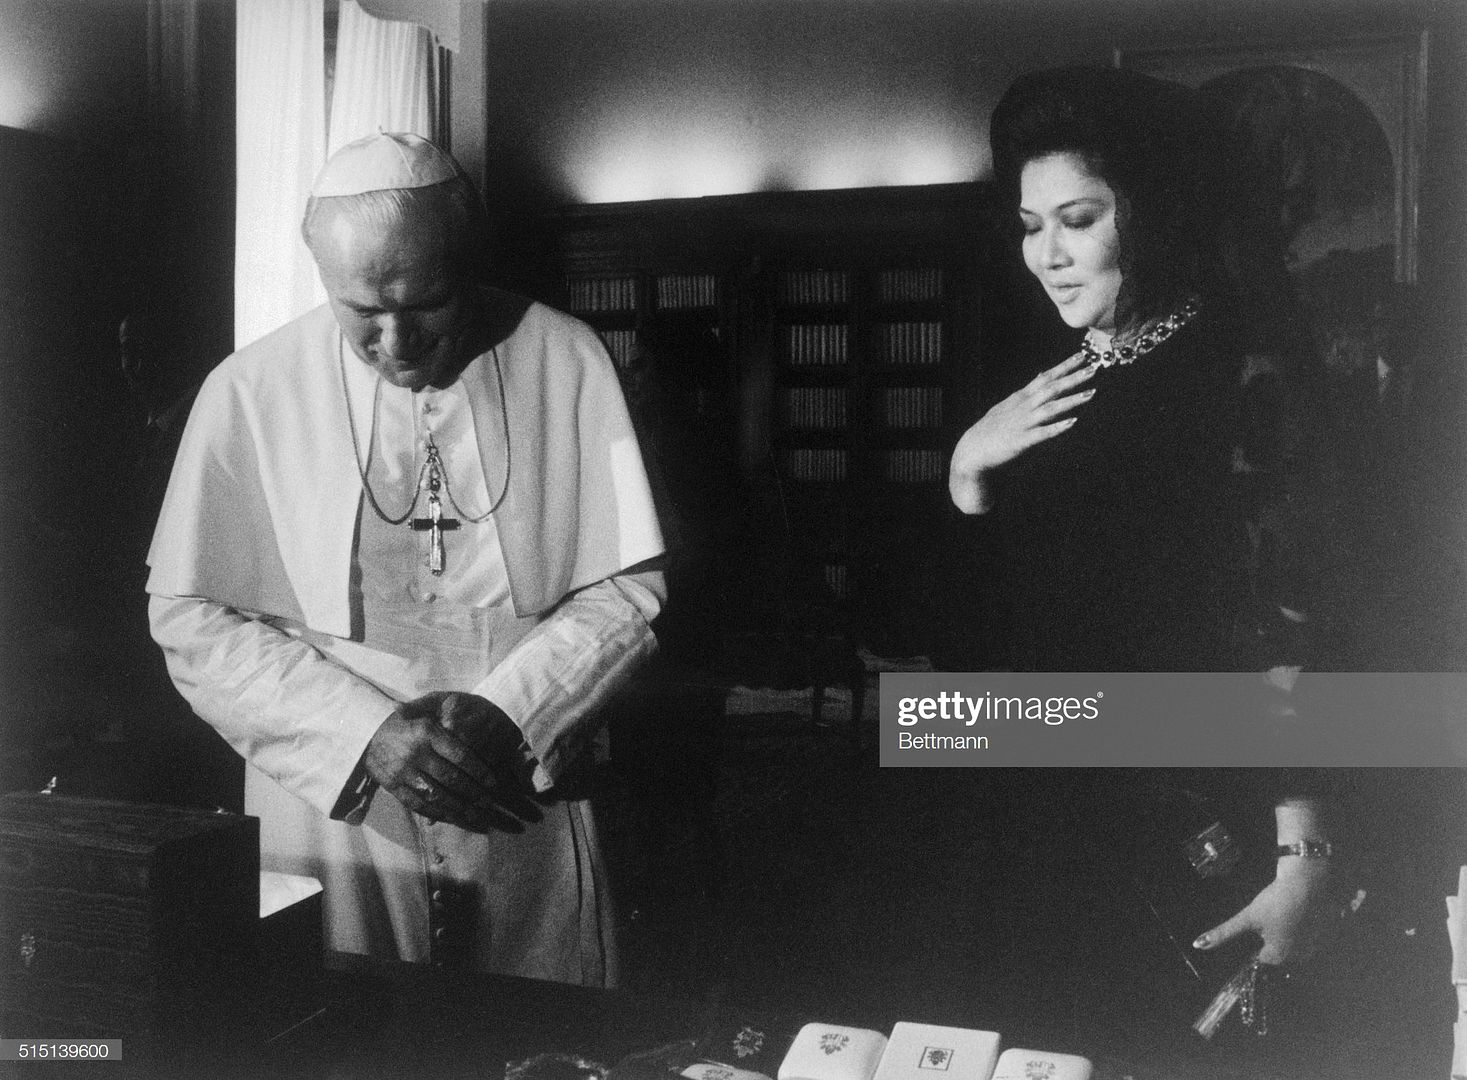 Black pearls for Vatican 8 July 1983 gettyimages-515139600-2048x2048